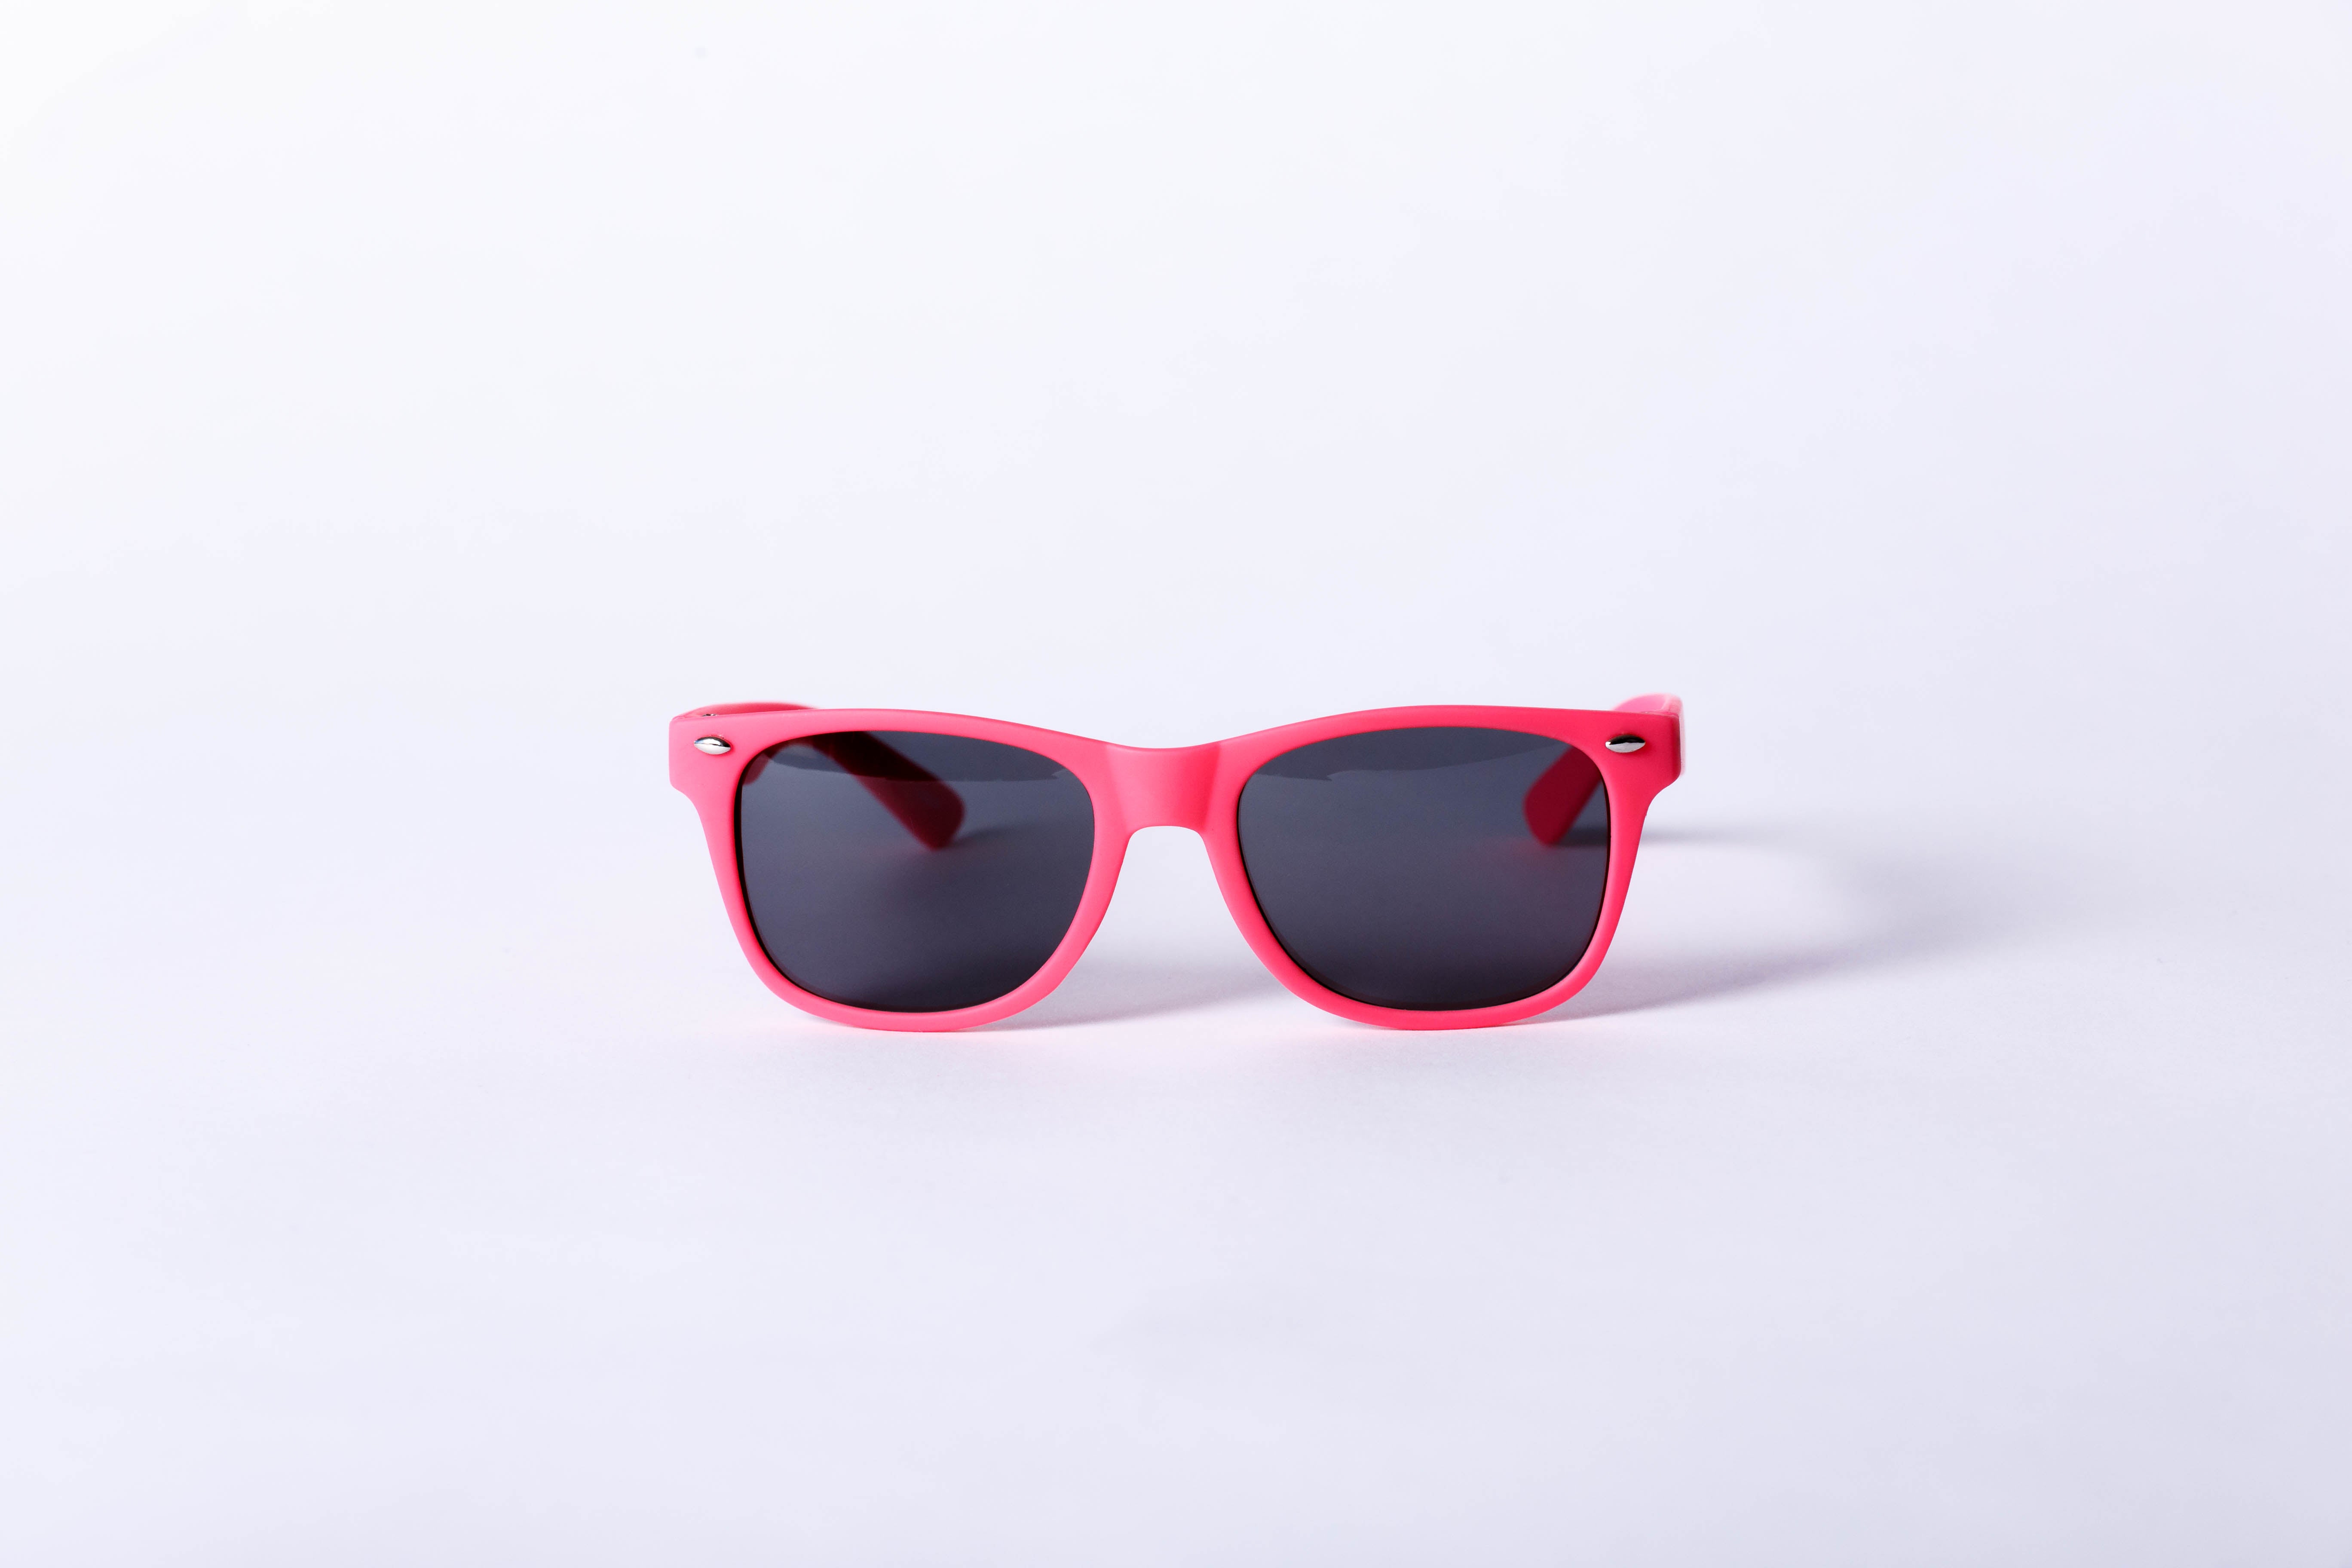 "Pink" Kids Sunglasses (ages 4-7)